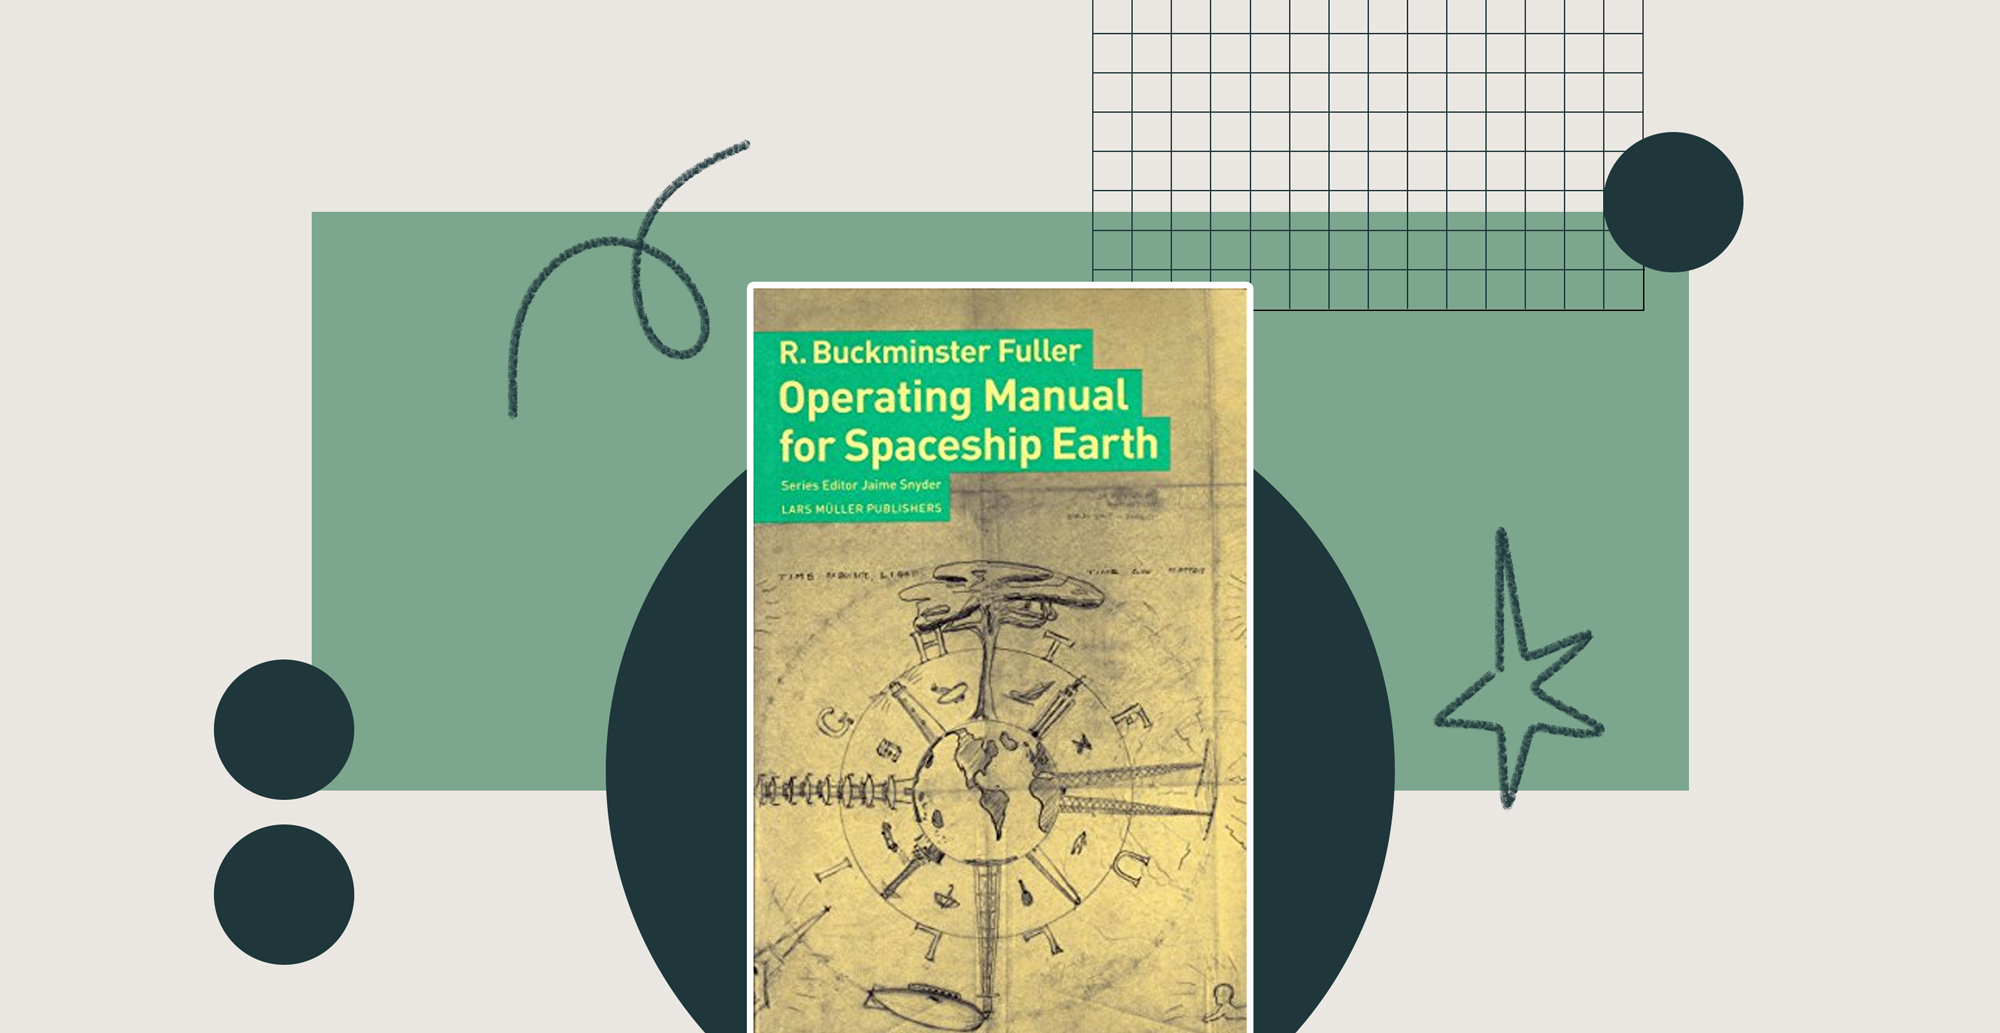 R. Buckminster Fuller's "Operating Manual for Spaceship Earth" provides guidance for steering our planet towards a sustainable future